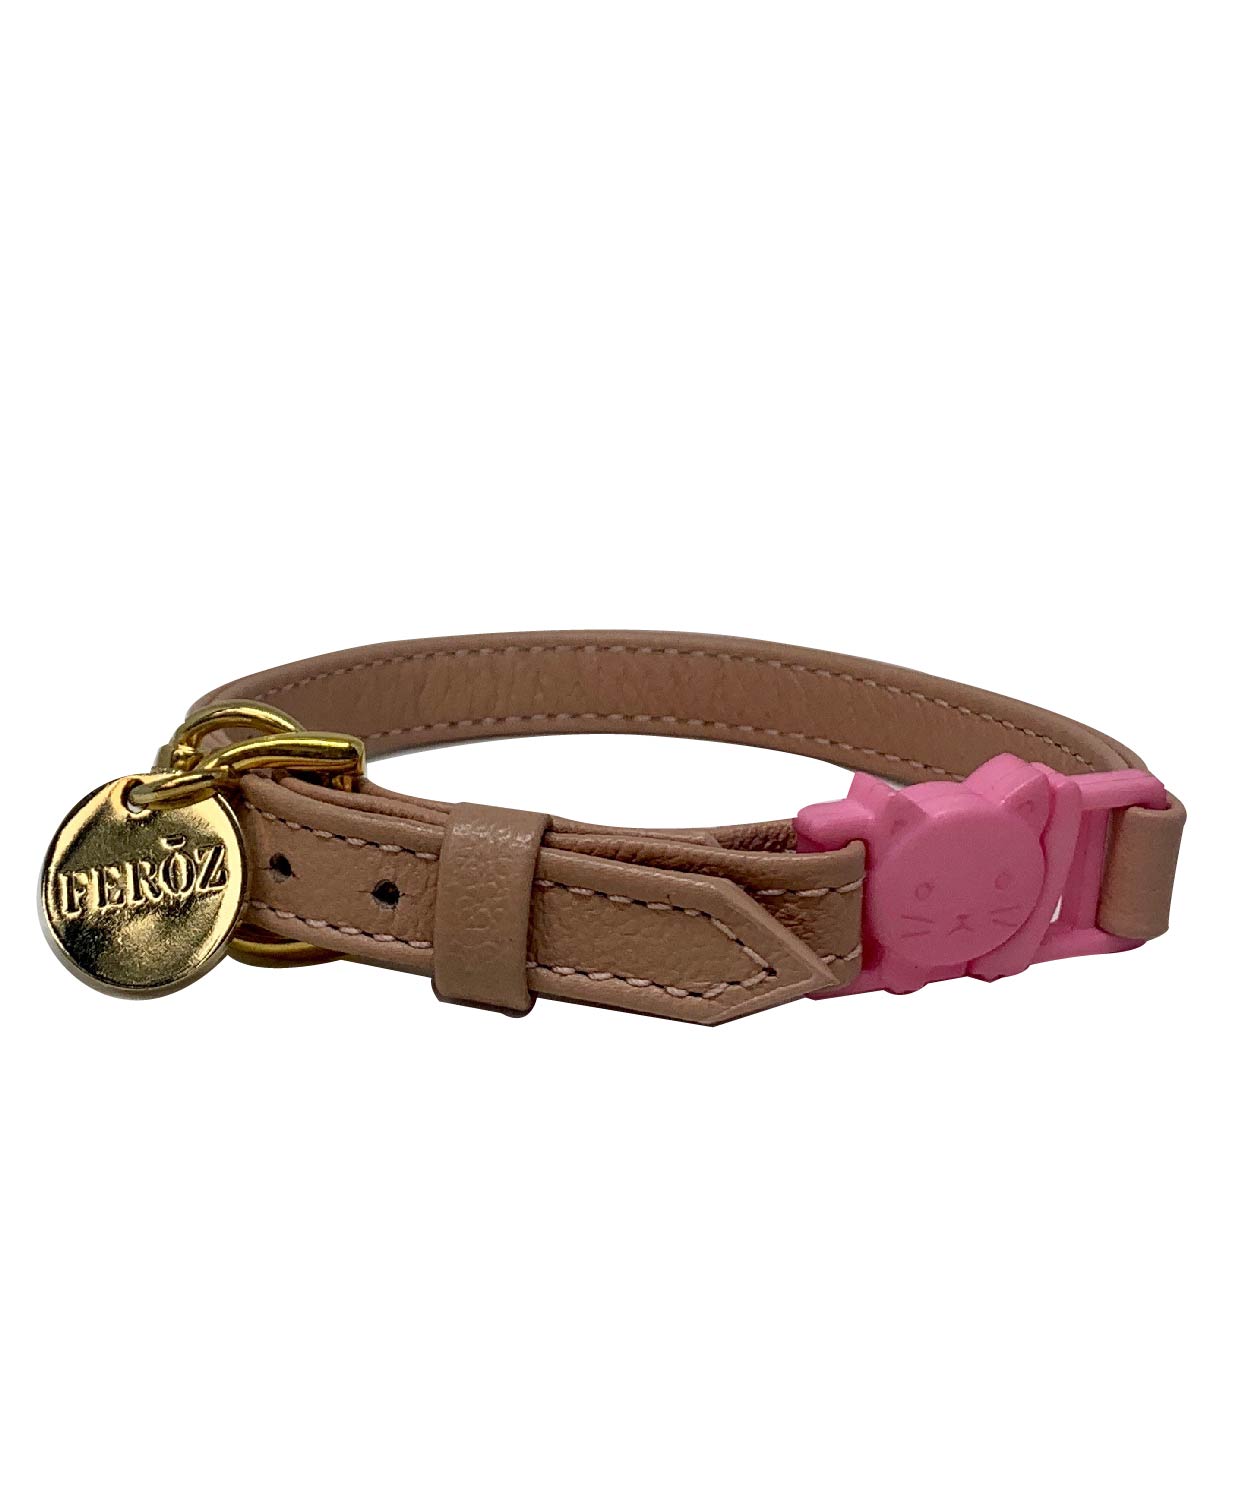 Dusty rose leather cat collar